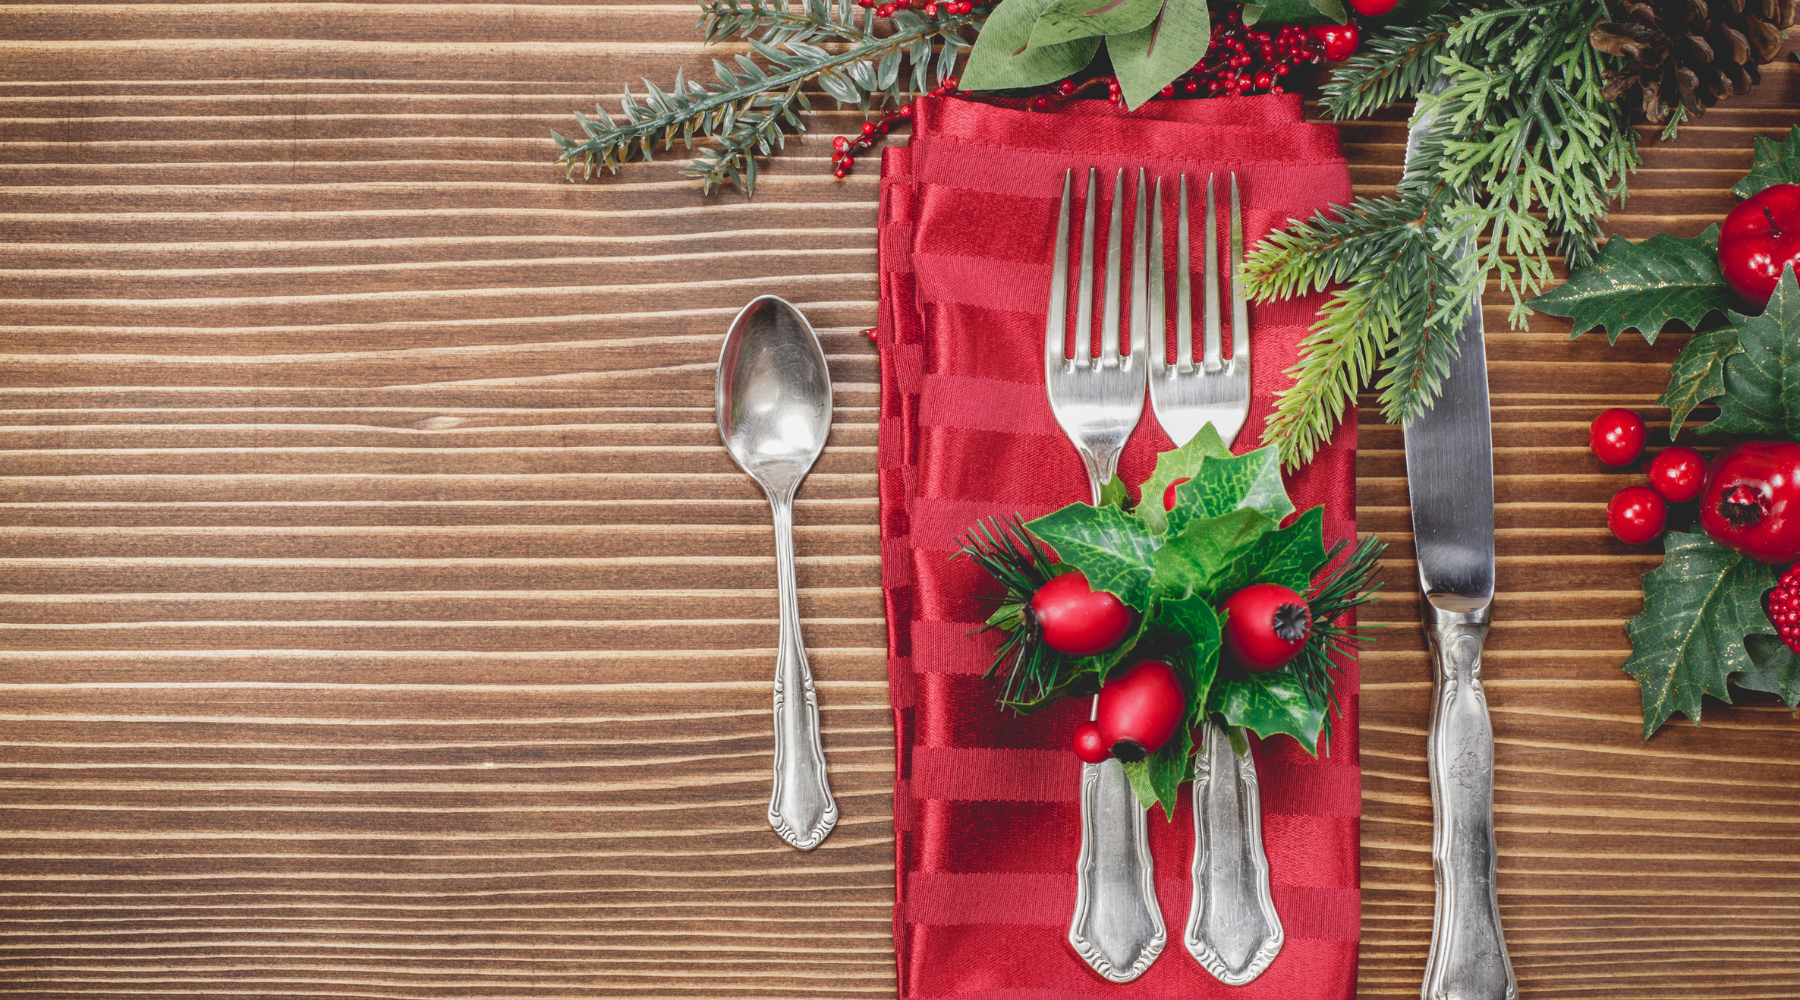 A SIMPLE, YET DELICIOUS PLANT-BASED CHRISTMAS MENU